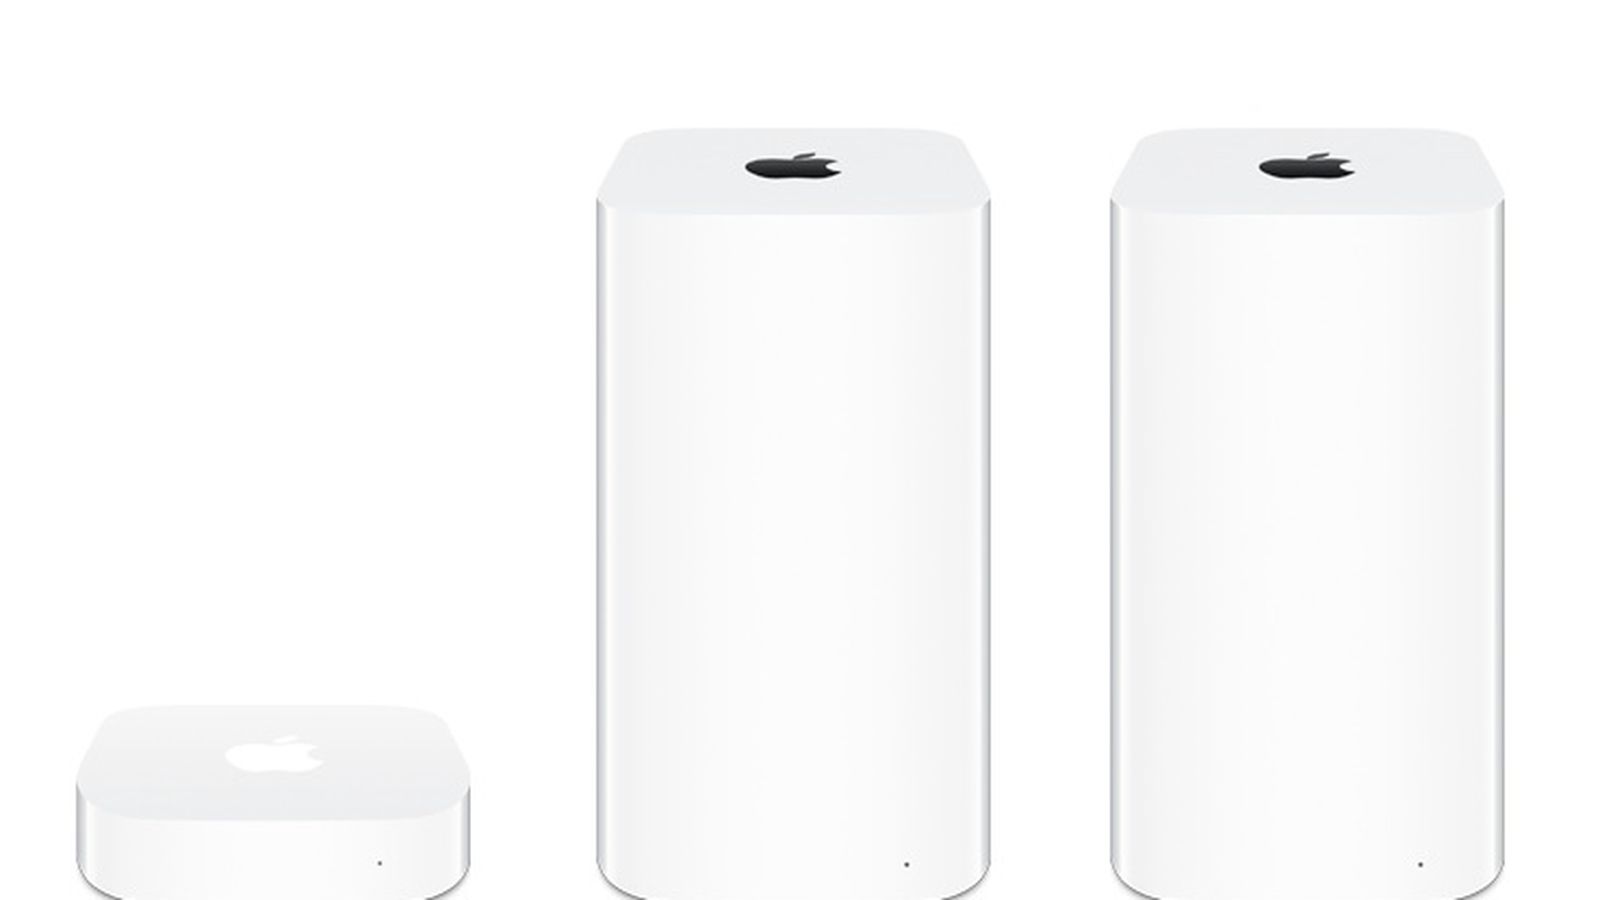 Discontinued AirPort Extreme and Time Capsule Finally Disappear From Apple Online Store -